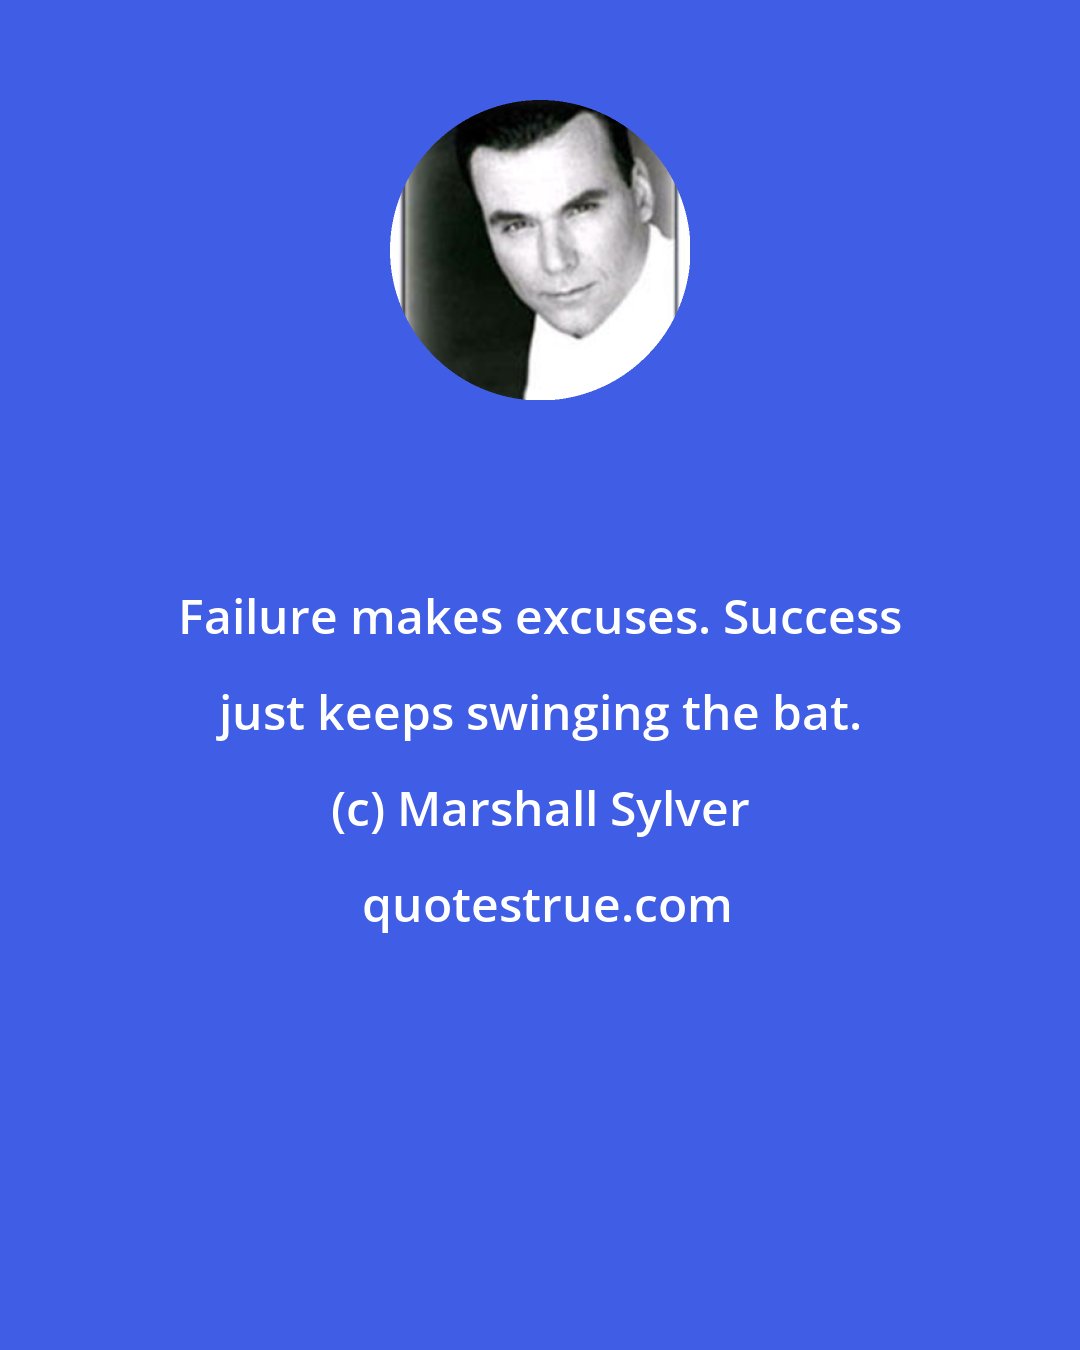 Marshall Sylver: Failure makes excuses. Success just keeps swinging the bat.